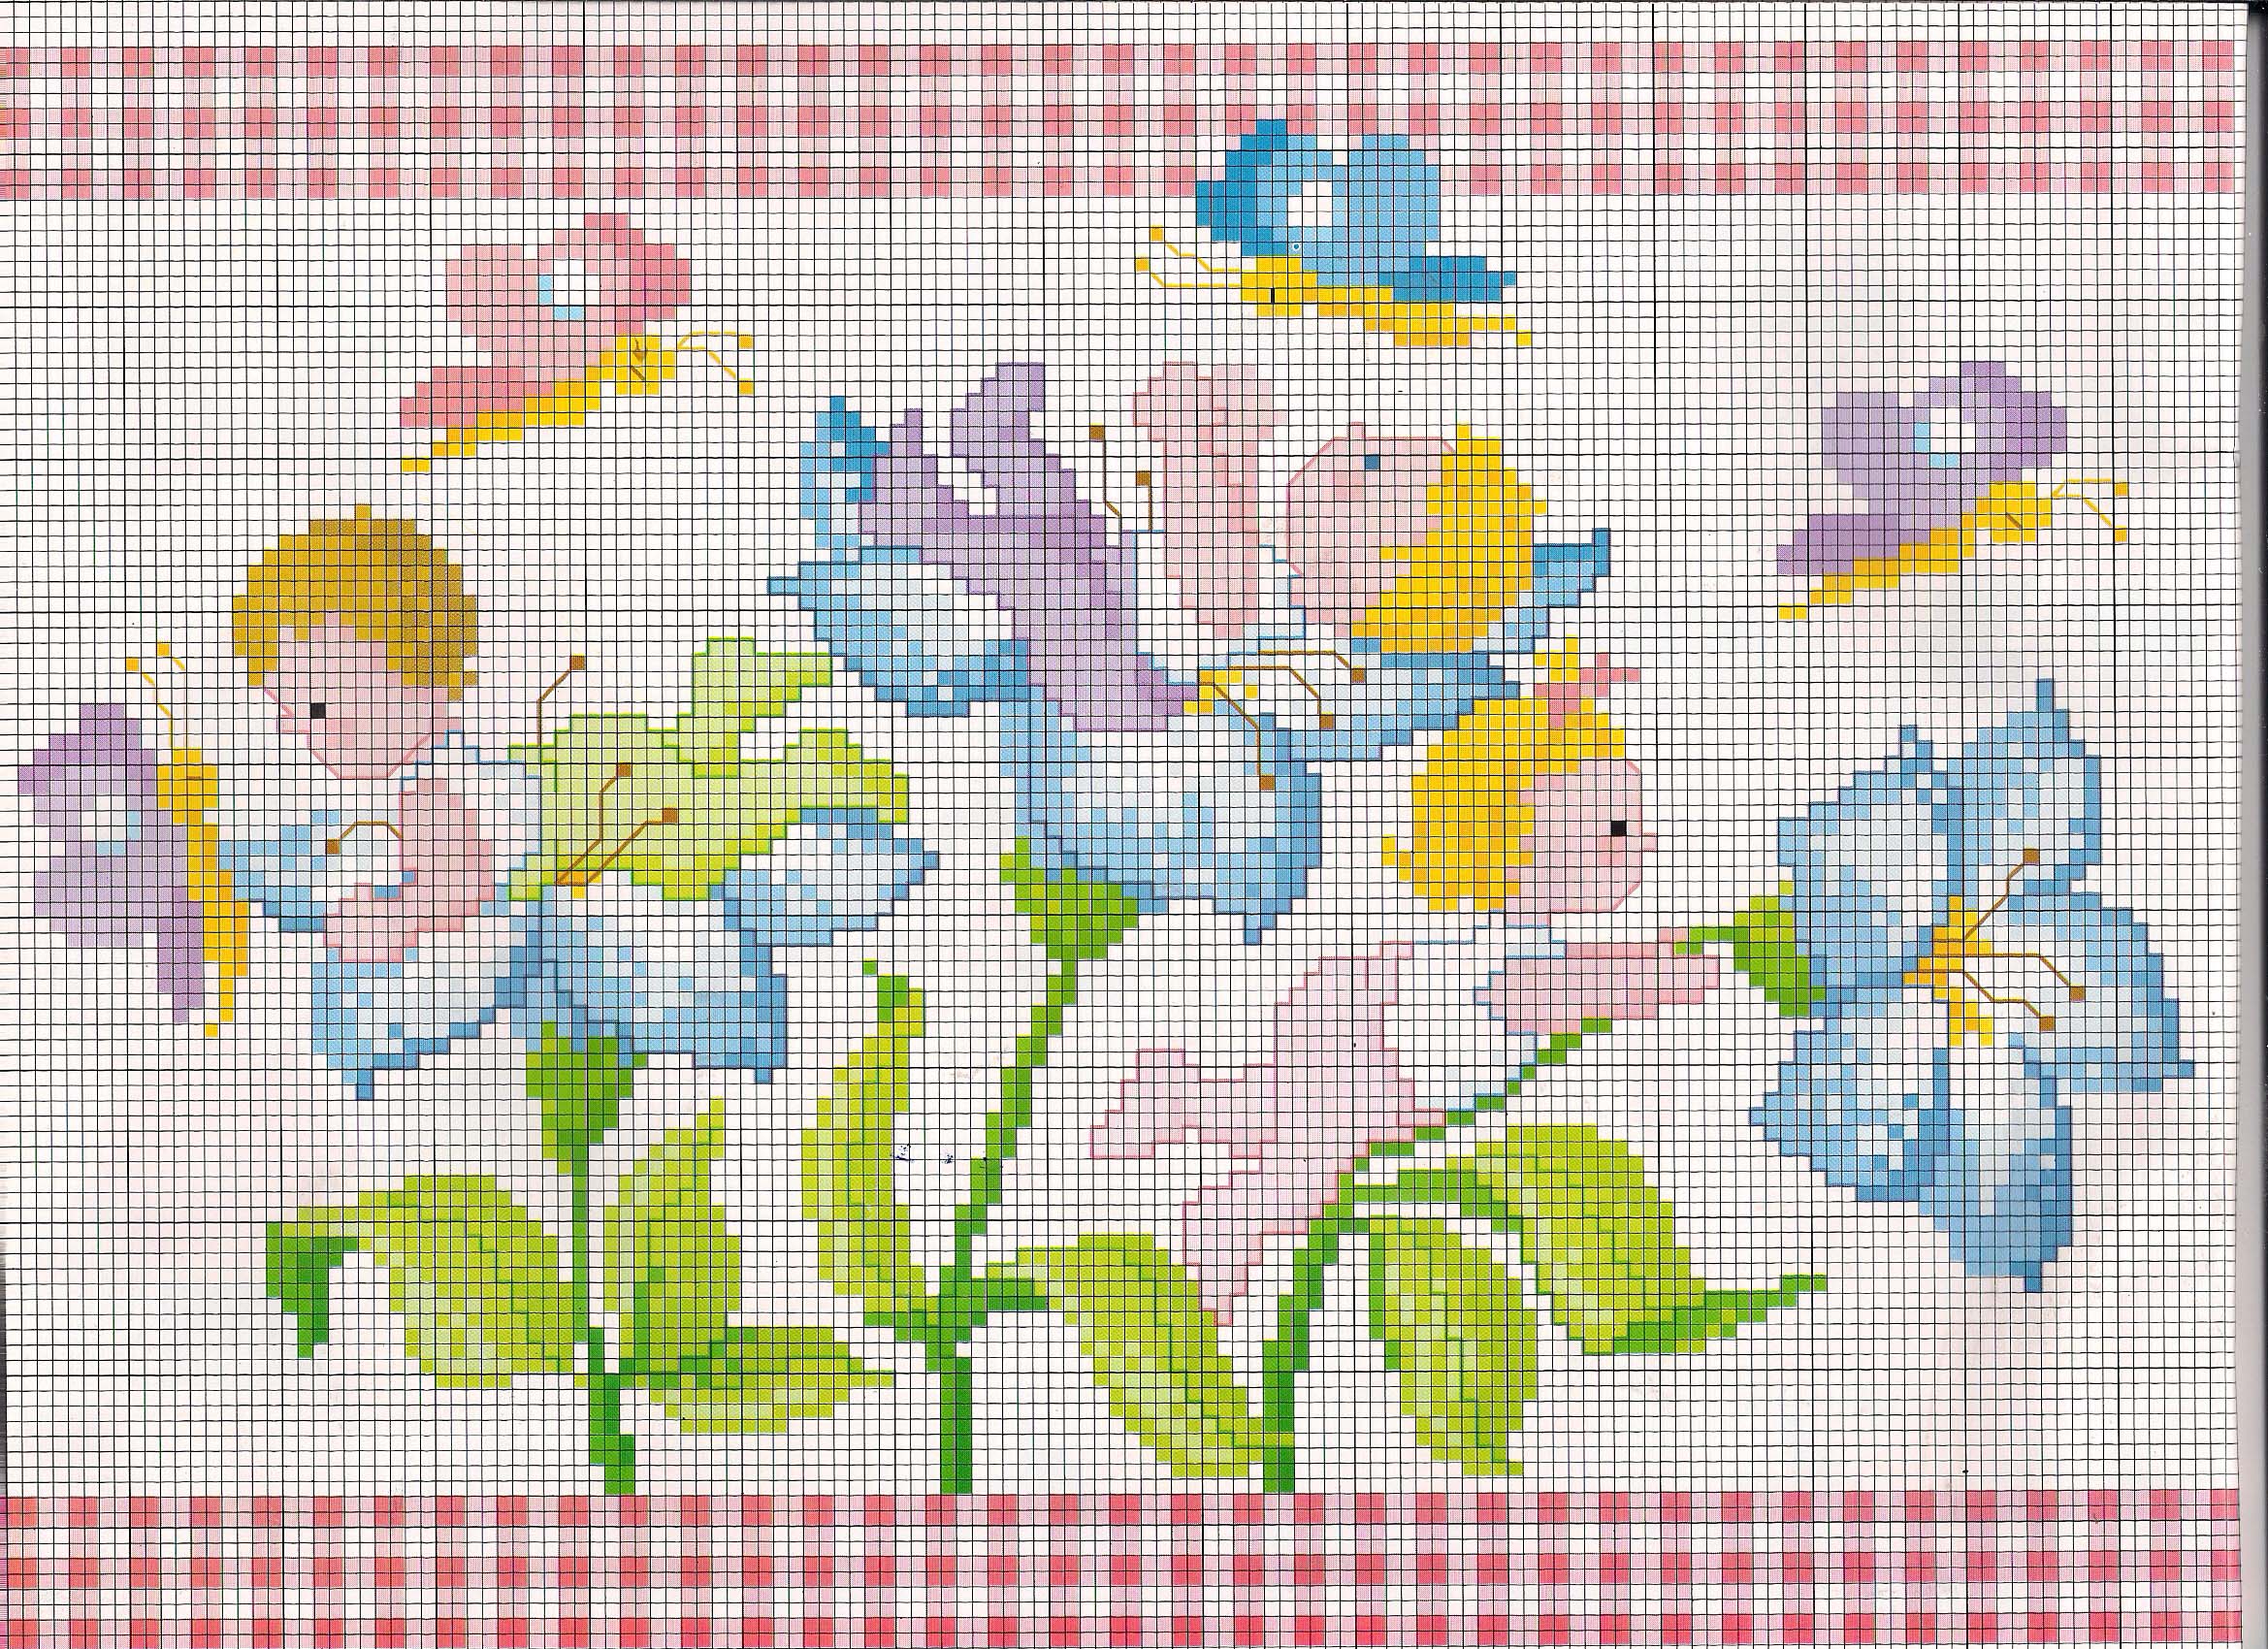 Baby among the flowers cross stitch idea cot sheets